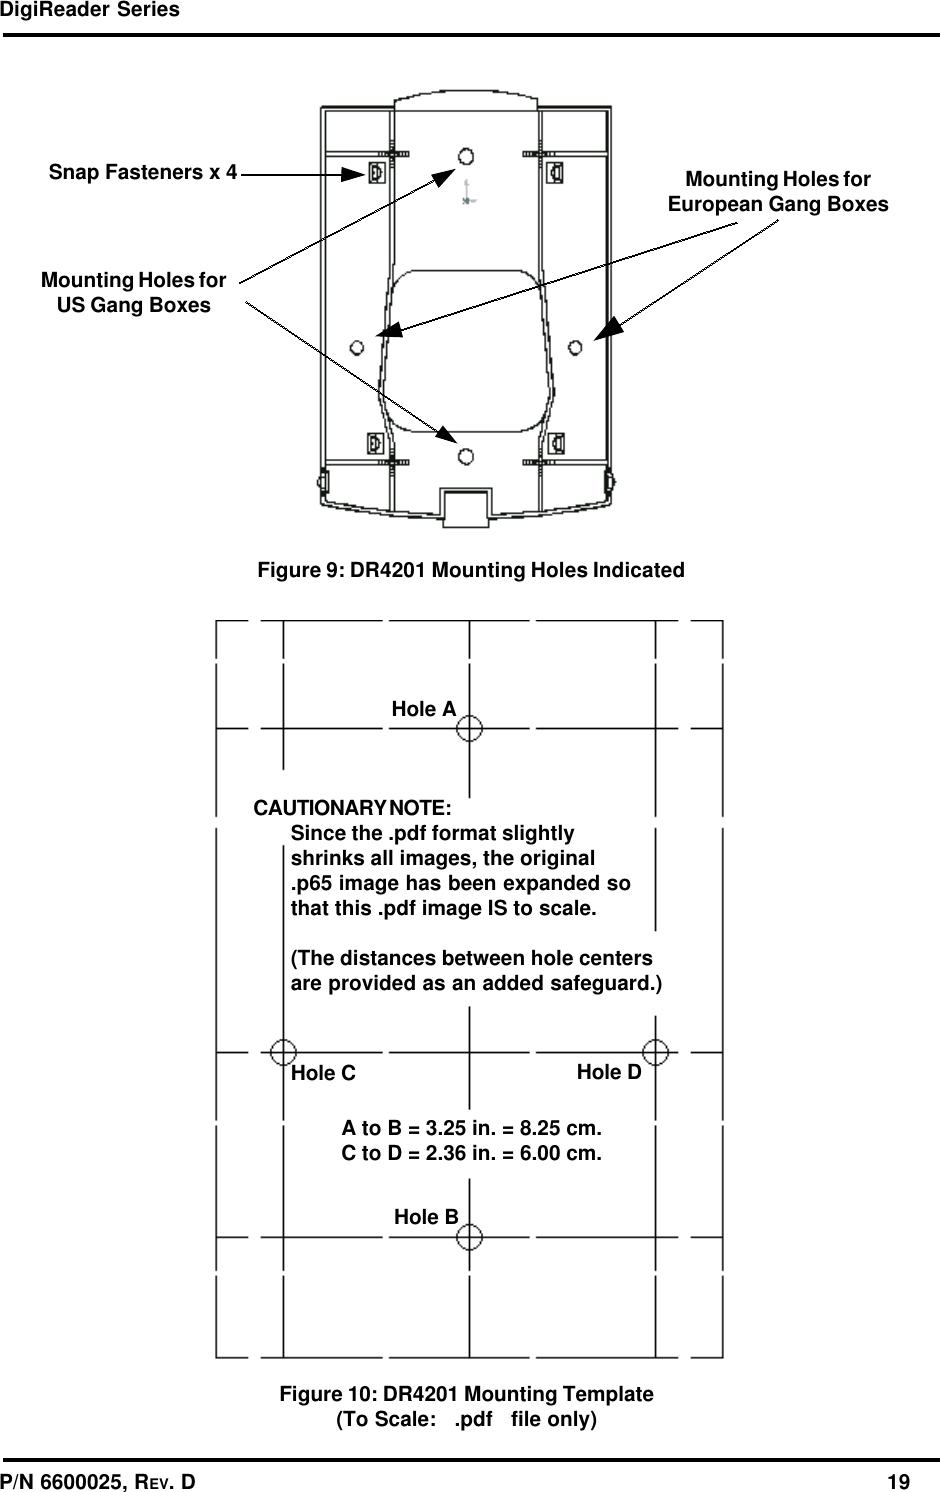 DigiReader SeriesP/N 6600025, REV. D                                                                                                              19Figure 9: DR4201 Mounting Holes IndicatedFigure 10: DR4201 Mounting Template(To Scale:   .pdf   file only)Mounting Holes forUS Gang BoxesMounting Holes forEuropean Gang BoxesSnap Fasteners x 4CAUTIONARY NOTE:Since the .pdf format slightlyshrinks all images, the original.p65 image has been expanded sothat this .pdf image IS to scale.(The distances between hole centersare provided as an added safeguard.)Hole AHole BHole C Hole DA to B = 3.25 in. = 8.25 cm.C to D = 2.36 in. = 6.00 cm.